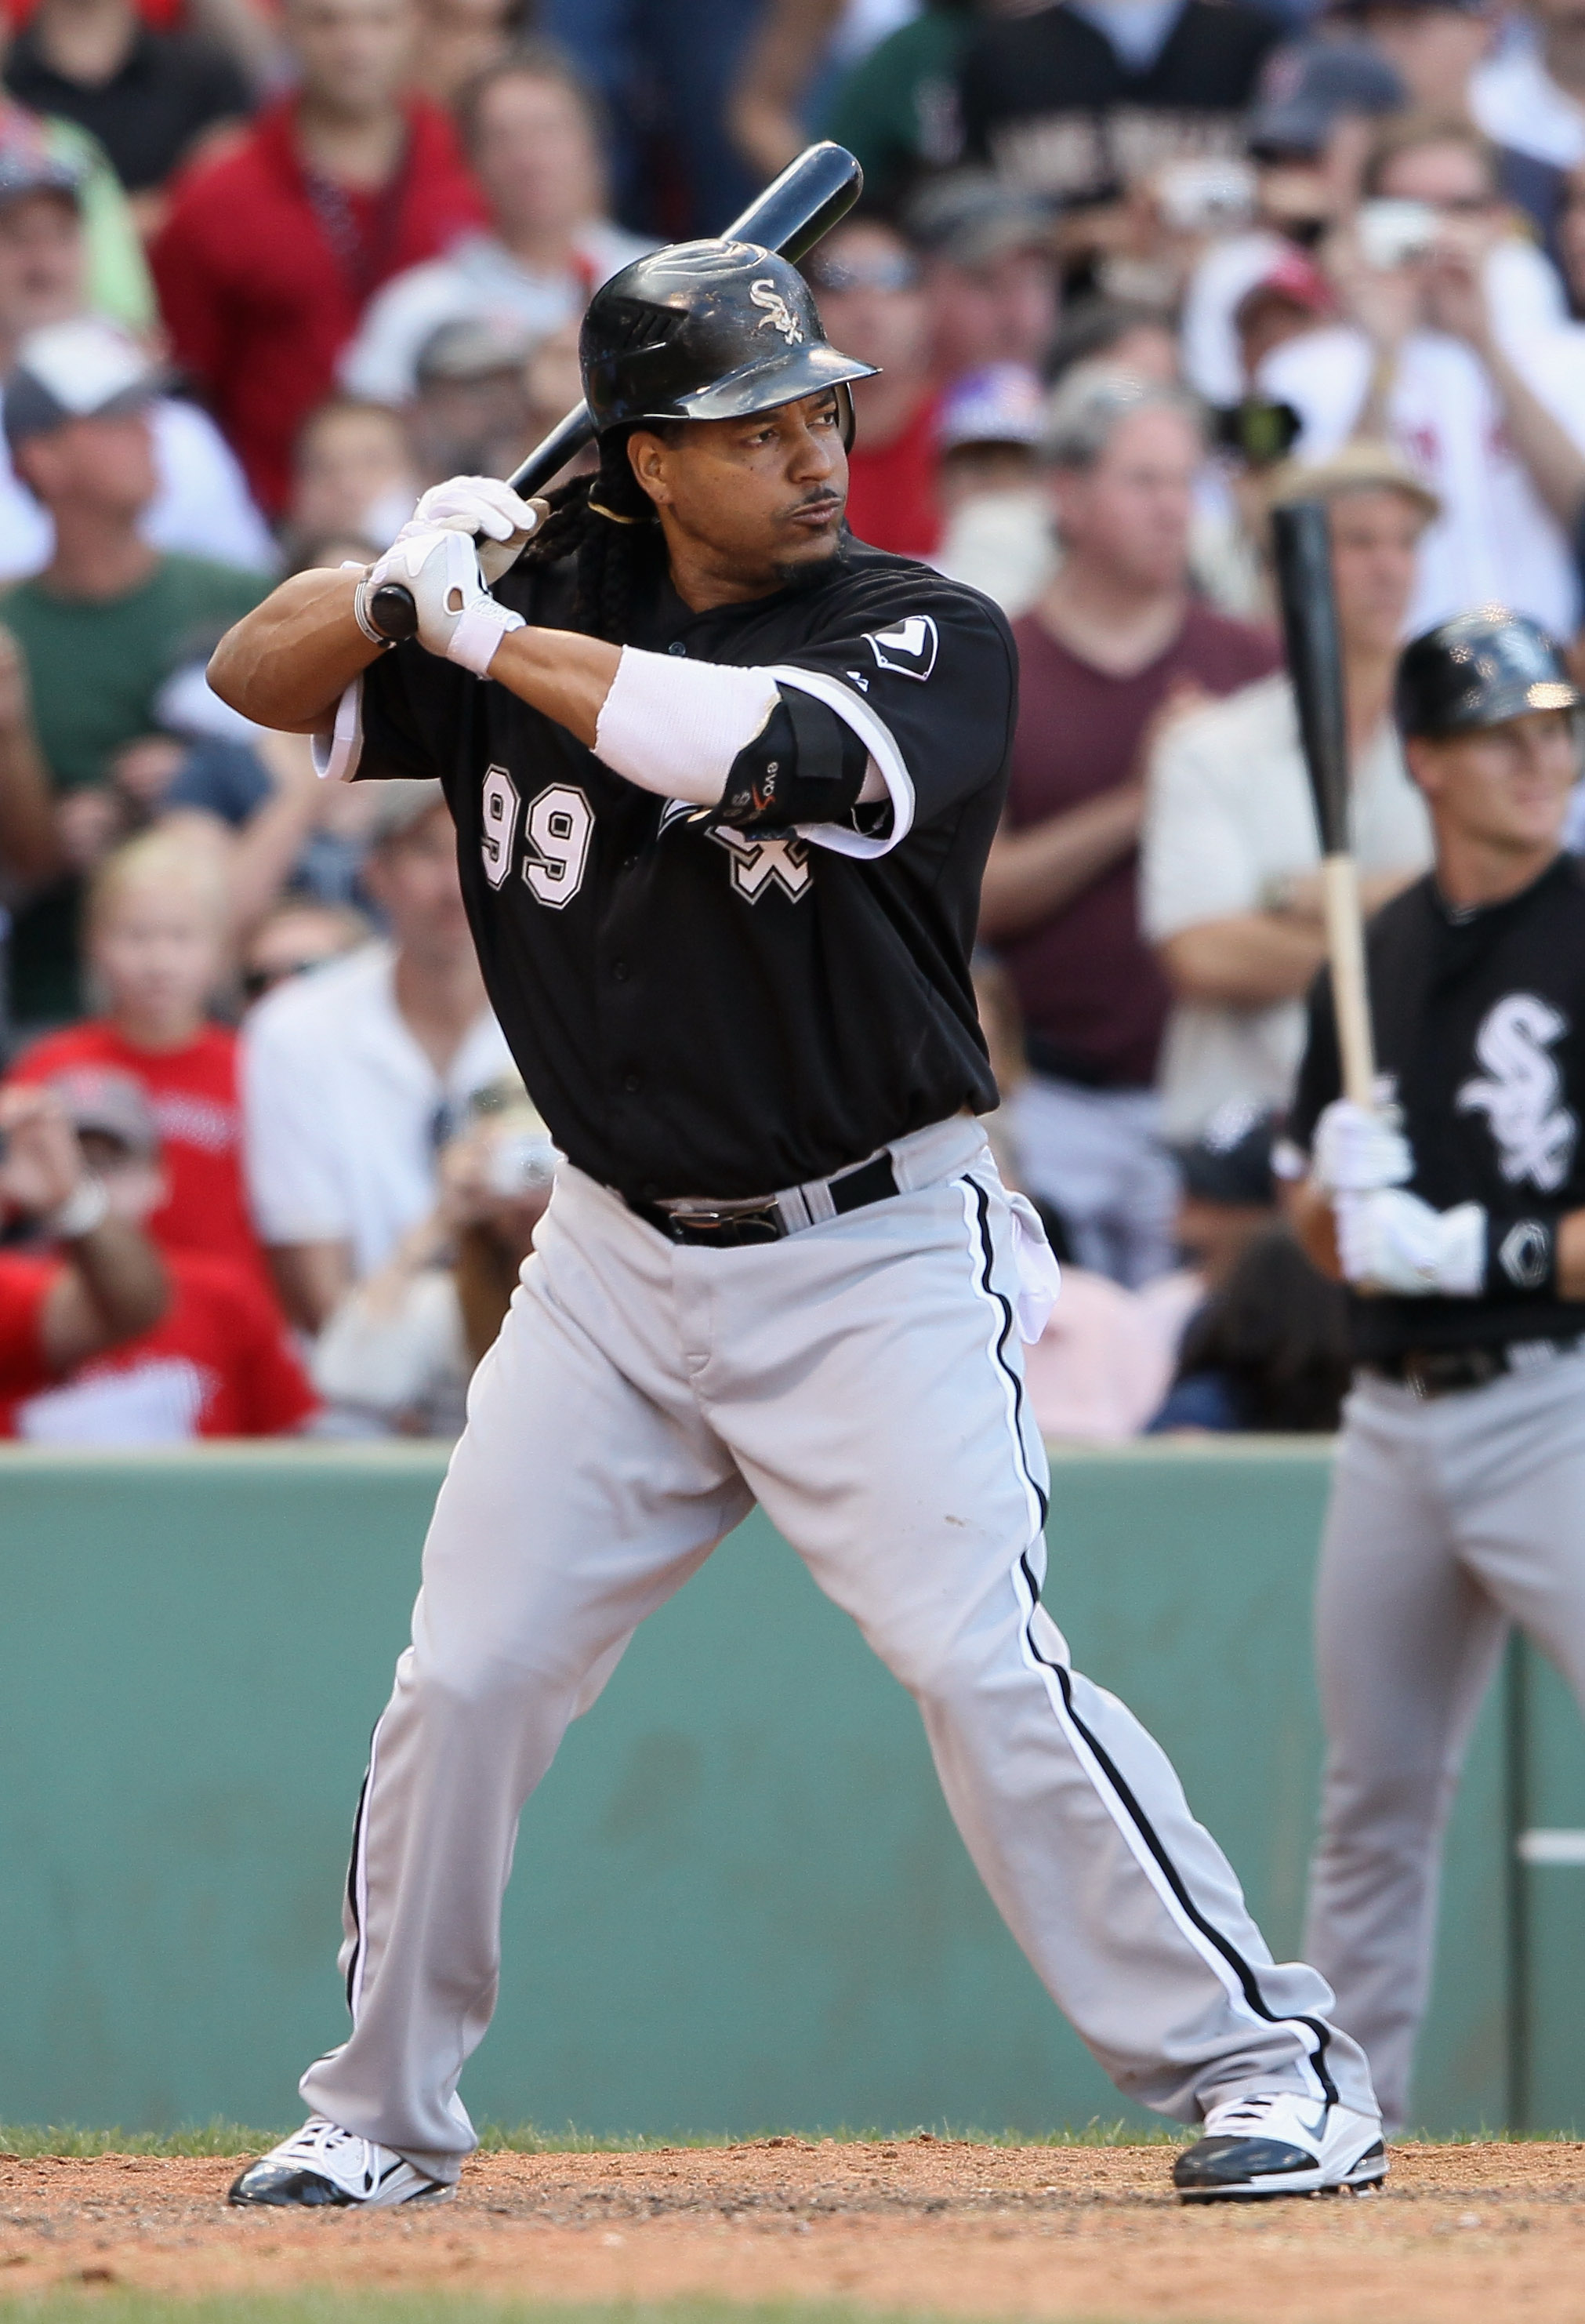 Manny Ramirez is Trying To Come Back Once Again - Bleacher Nation